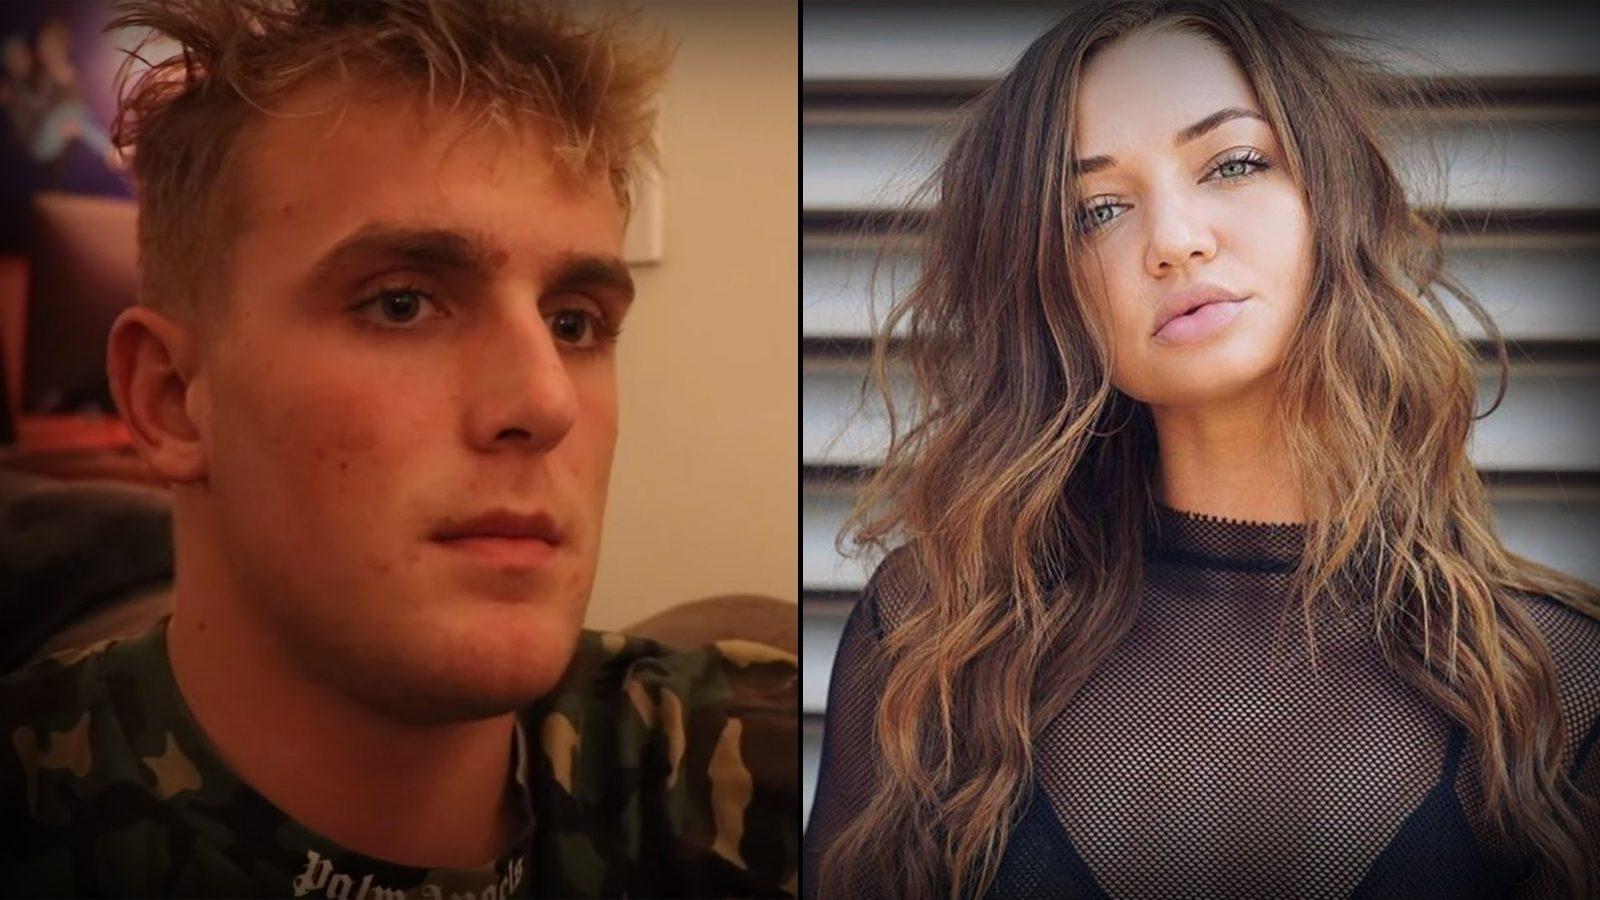 Jake Paul To Discontinue 'Uncut' Docuseries Because It Became Too